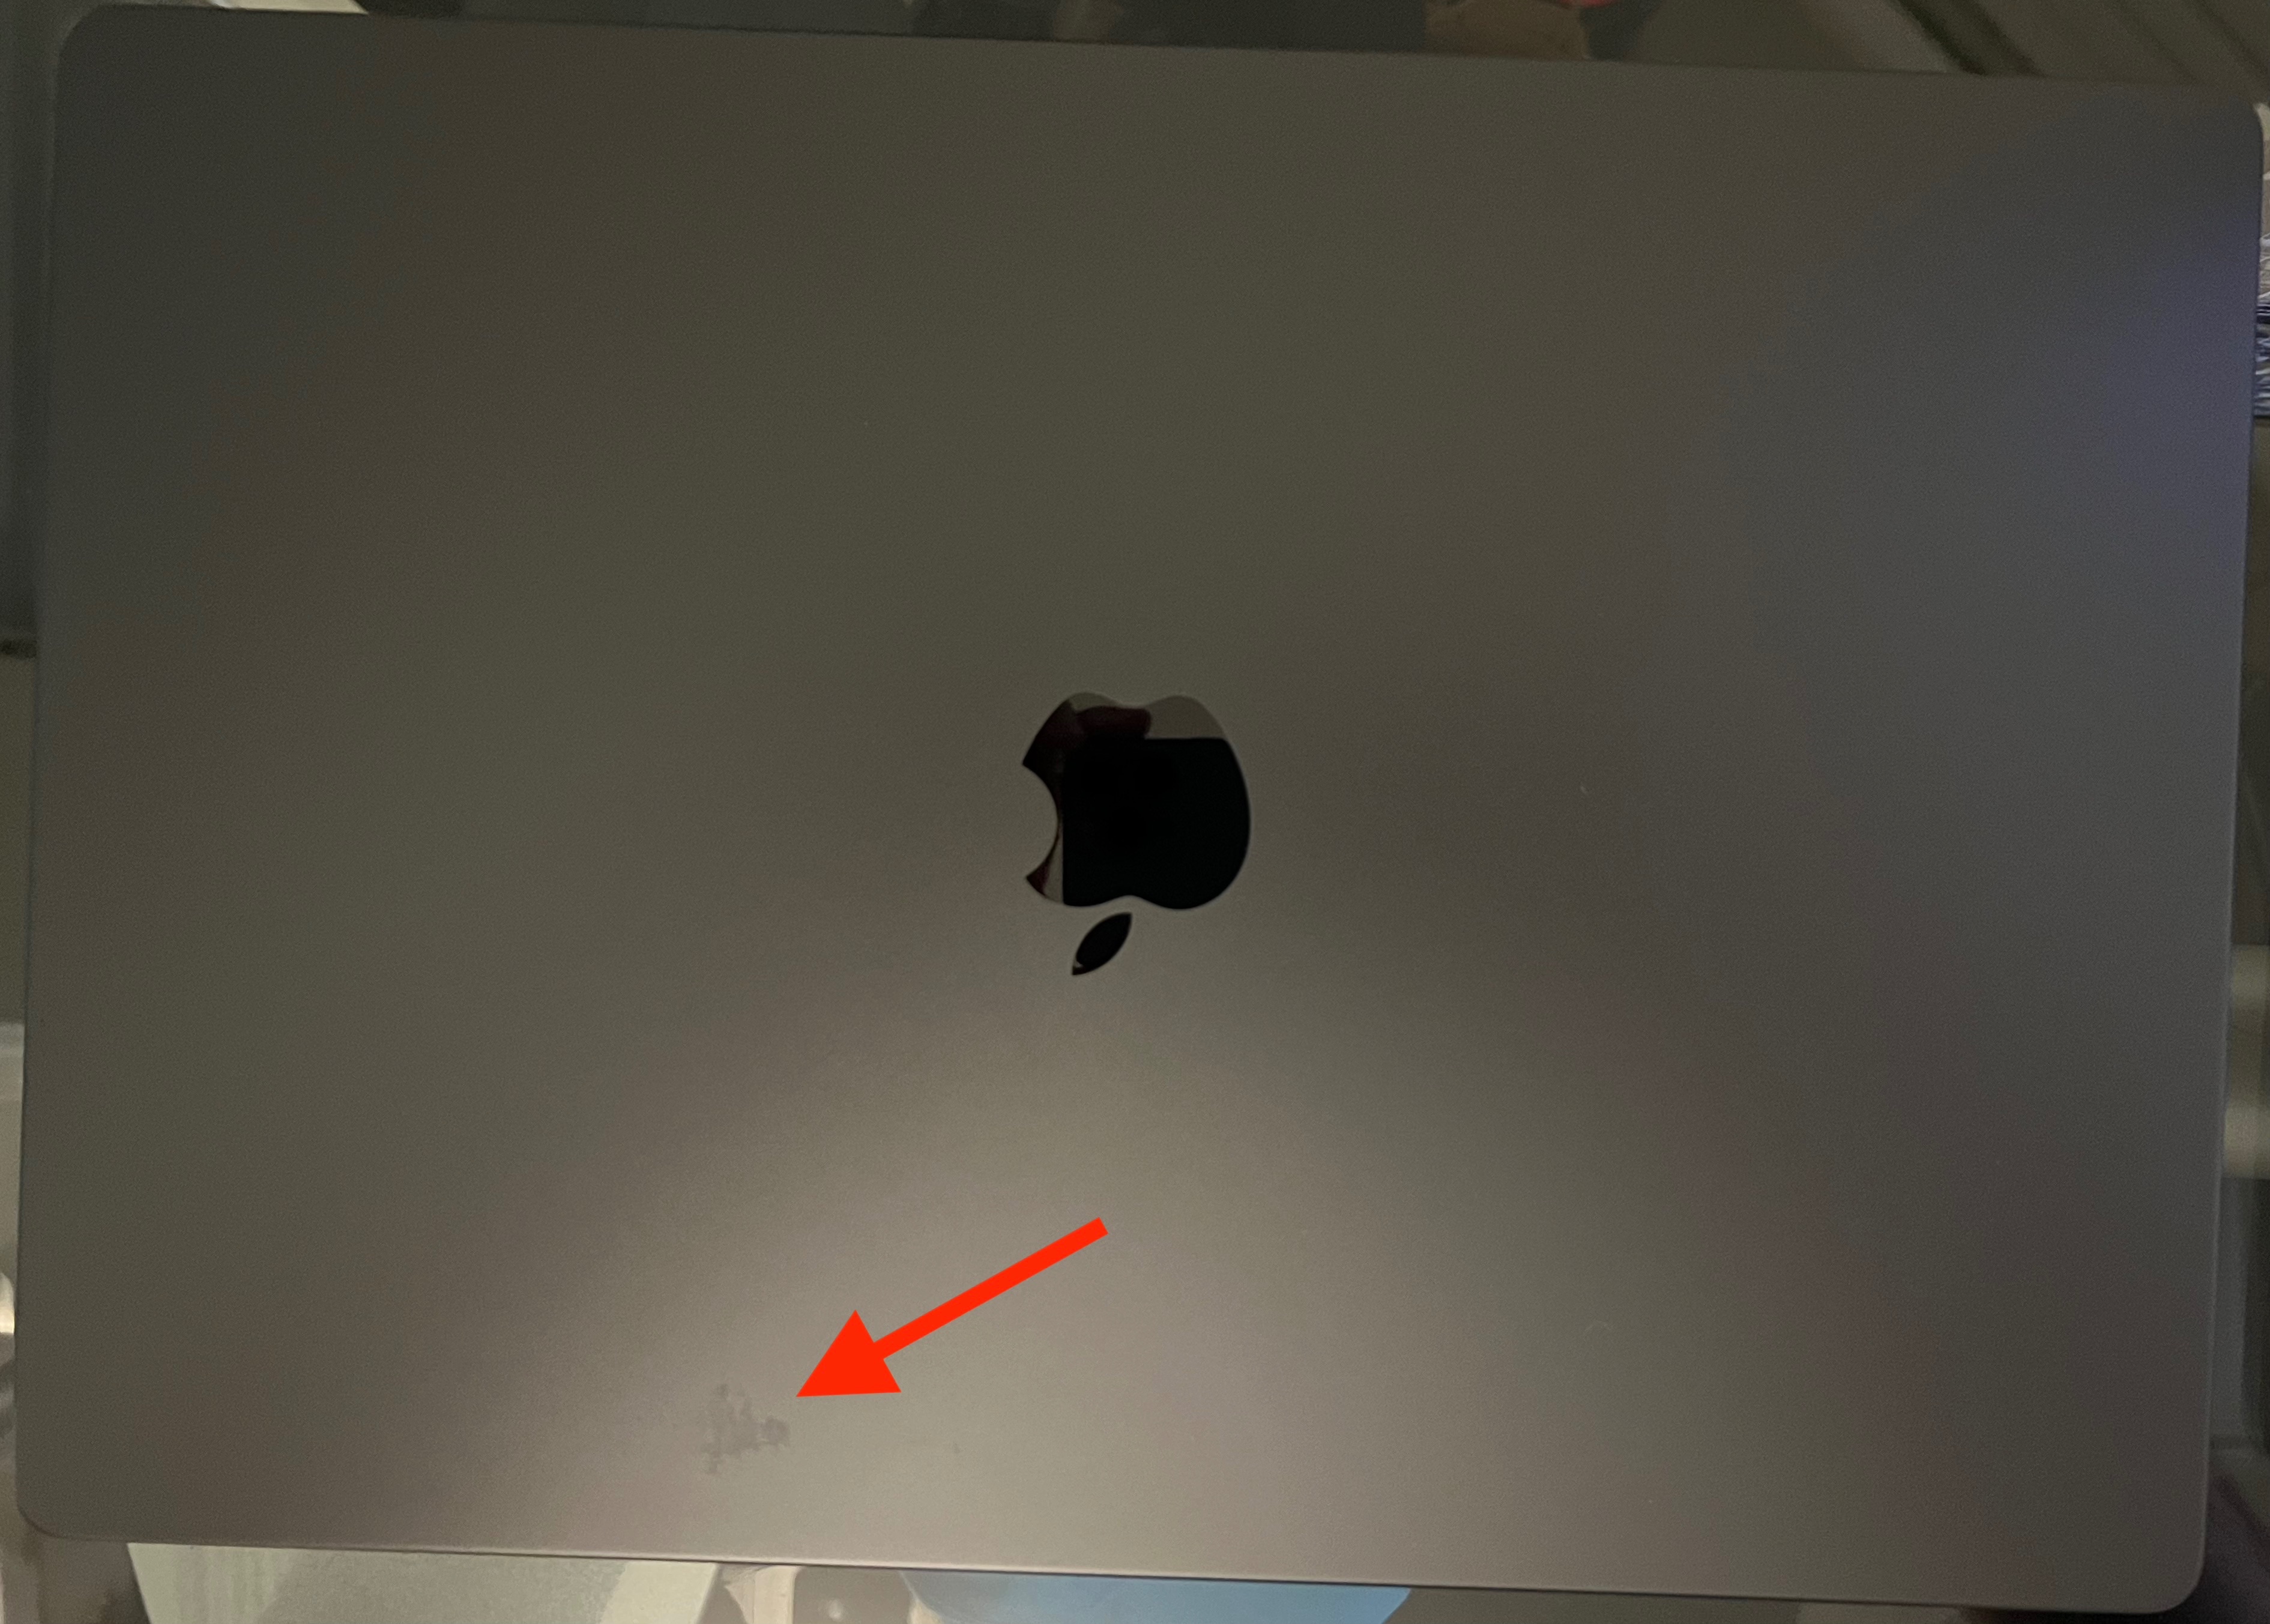 Why I returned the M3 Pro MacBook Pro before I even opened the box